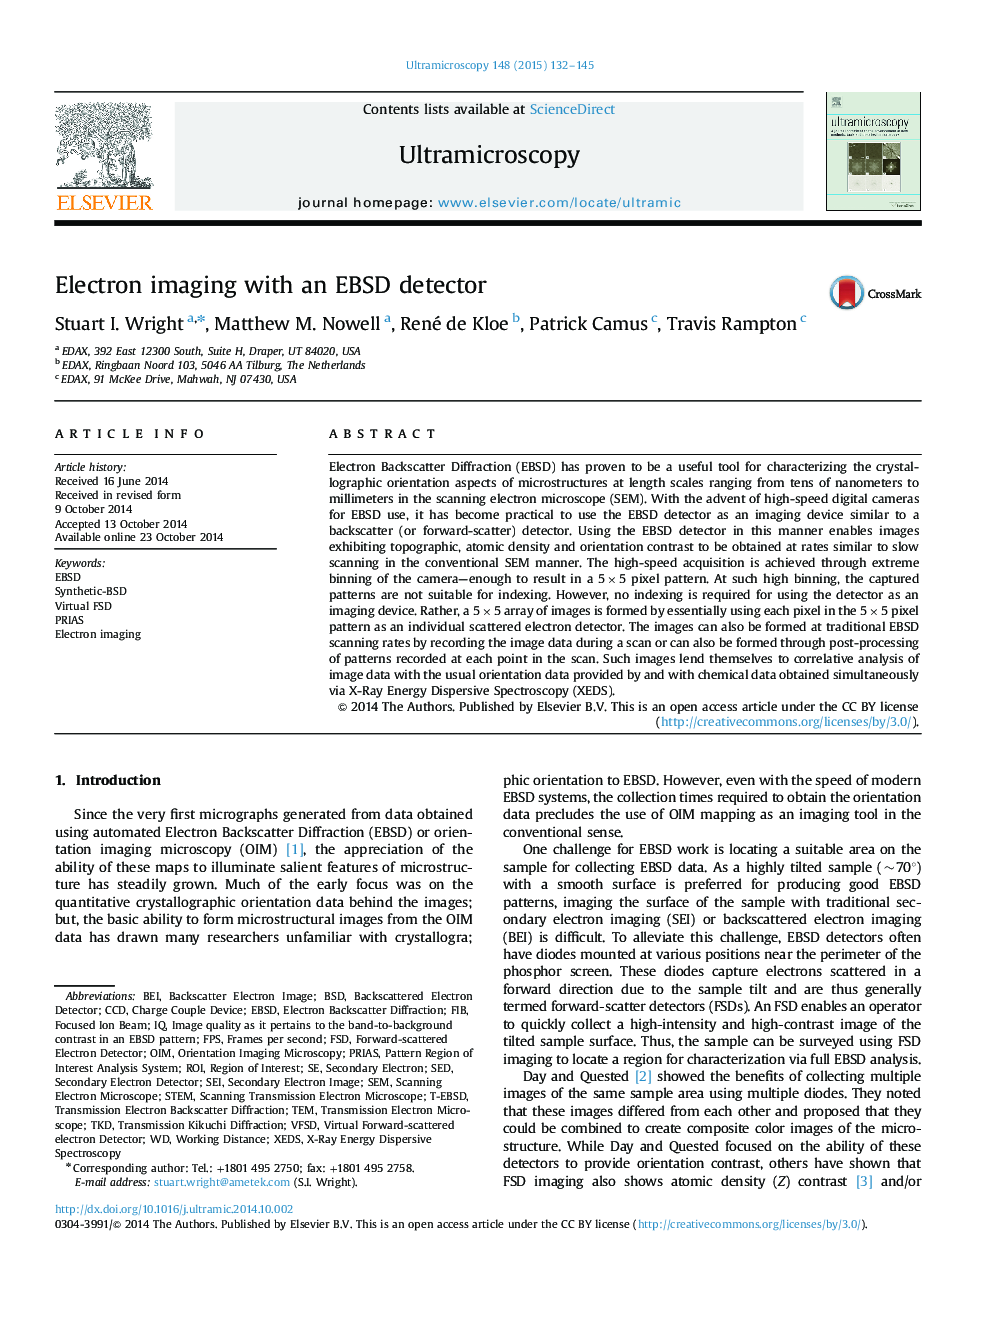 Electron imaging with an EBSD detector